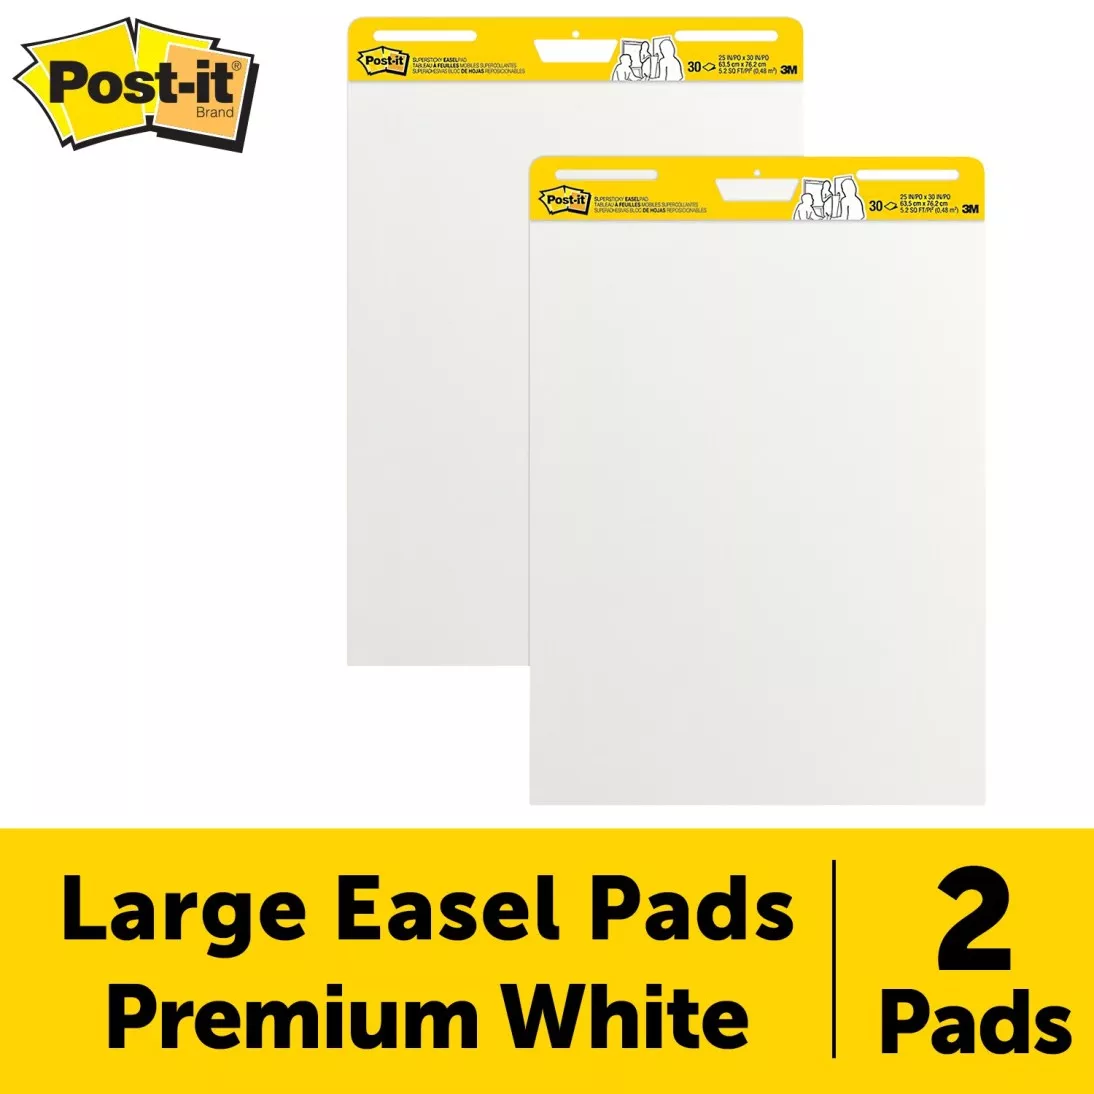 Post-it® Super Sticky Easel Pad 559, 25 in. x 30 in., White, 30
Sheets/Pad